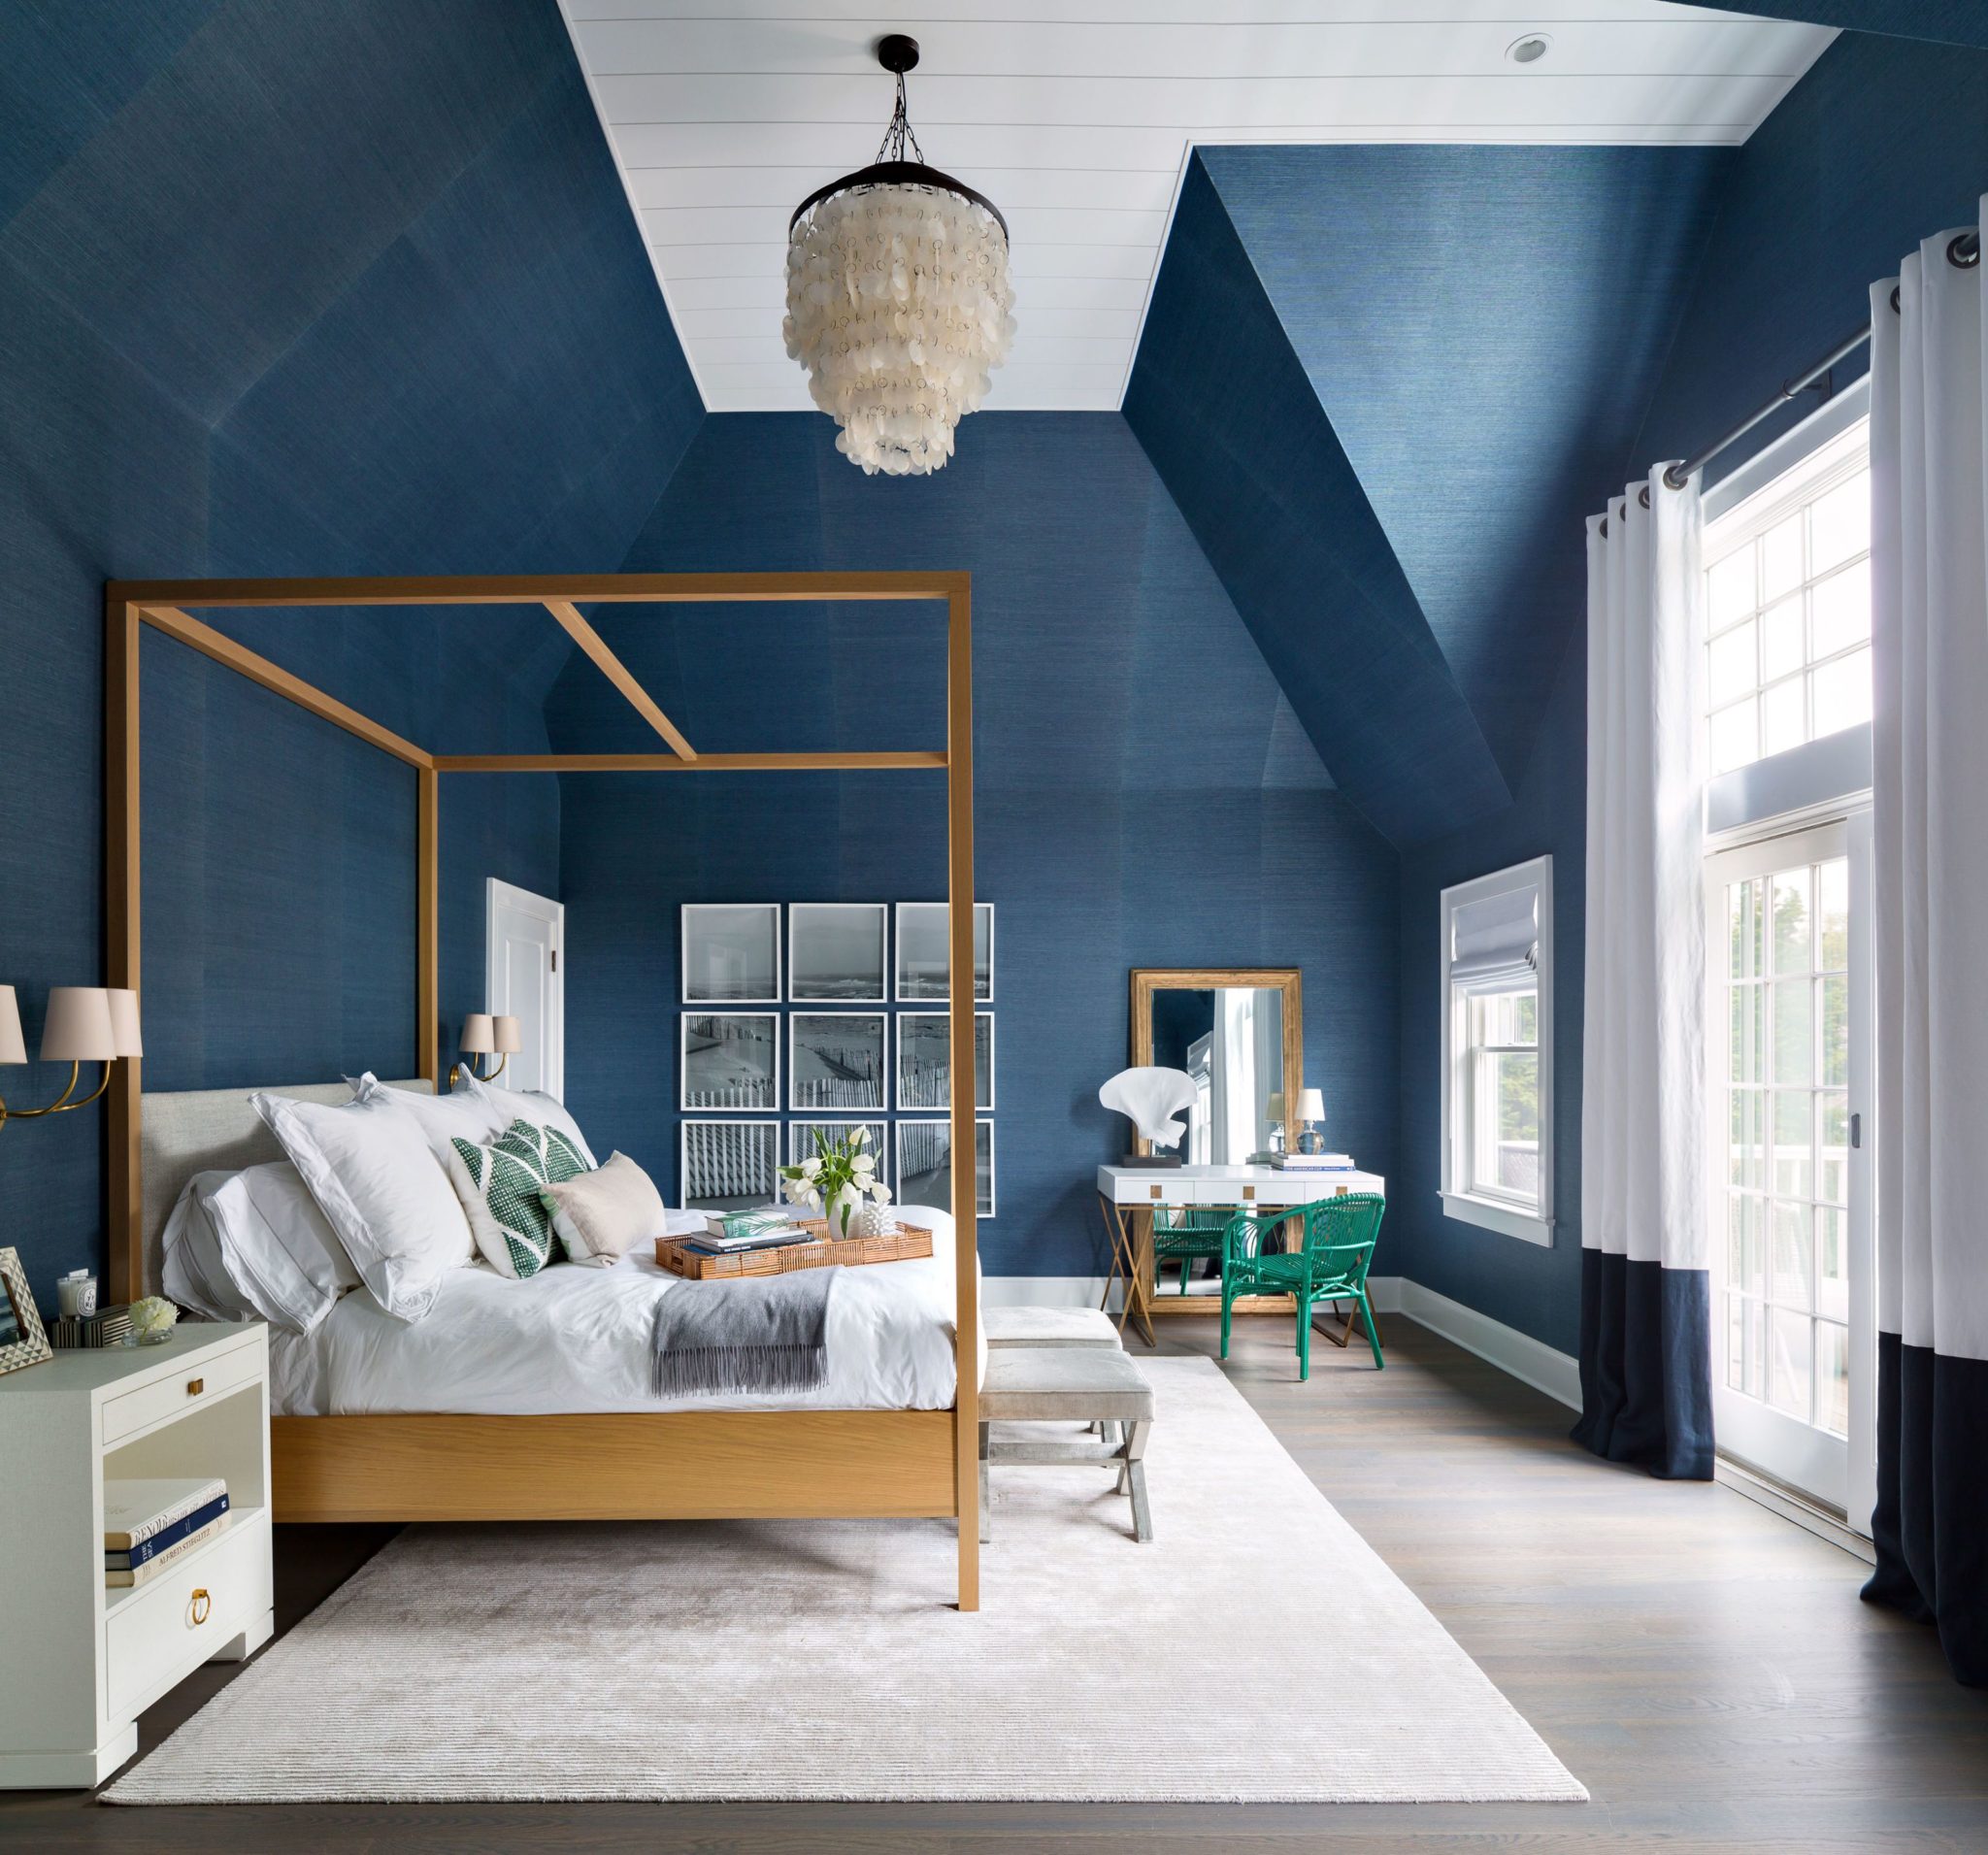 Blue bedroom with a snug and secure ambiance